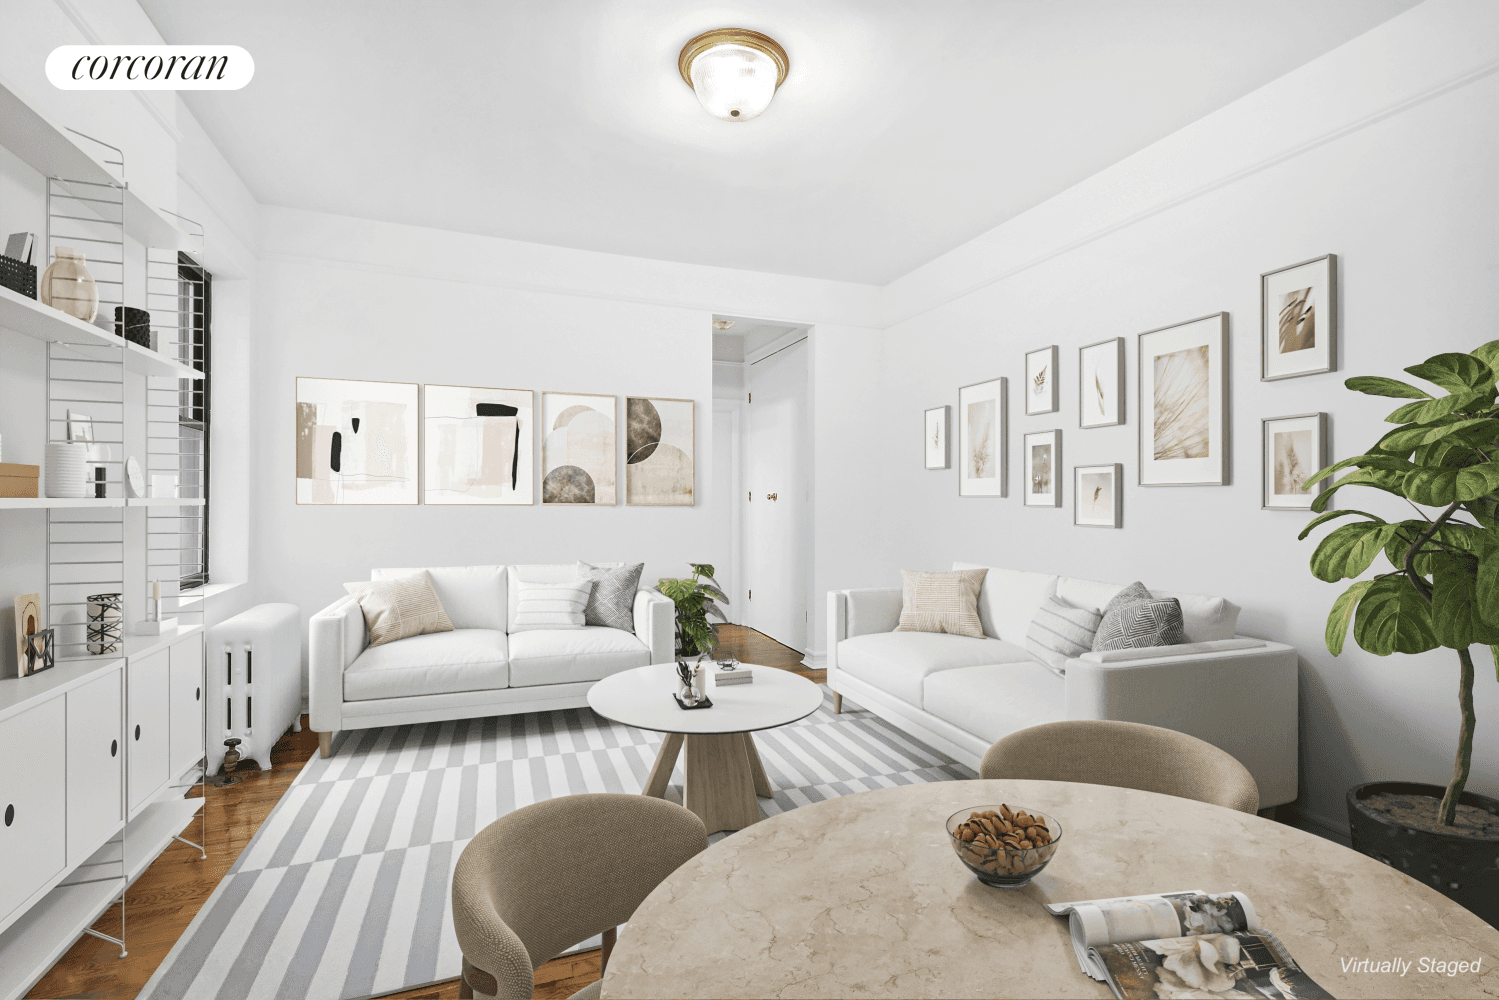 115 West 16th St, apartment 231 is a spacious and bright true one bedroom home perfectly located in Chelsea next to the West Village, Greenwich Village, Flatiron and Union Square.